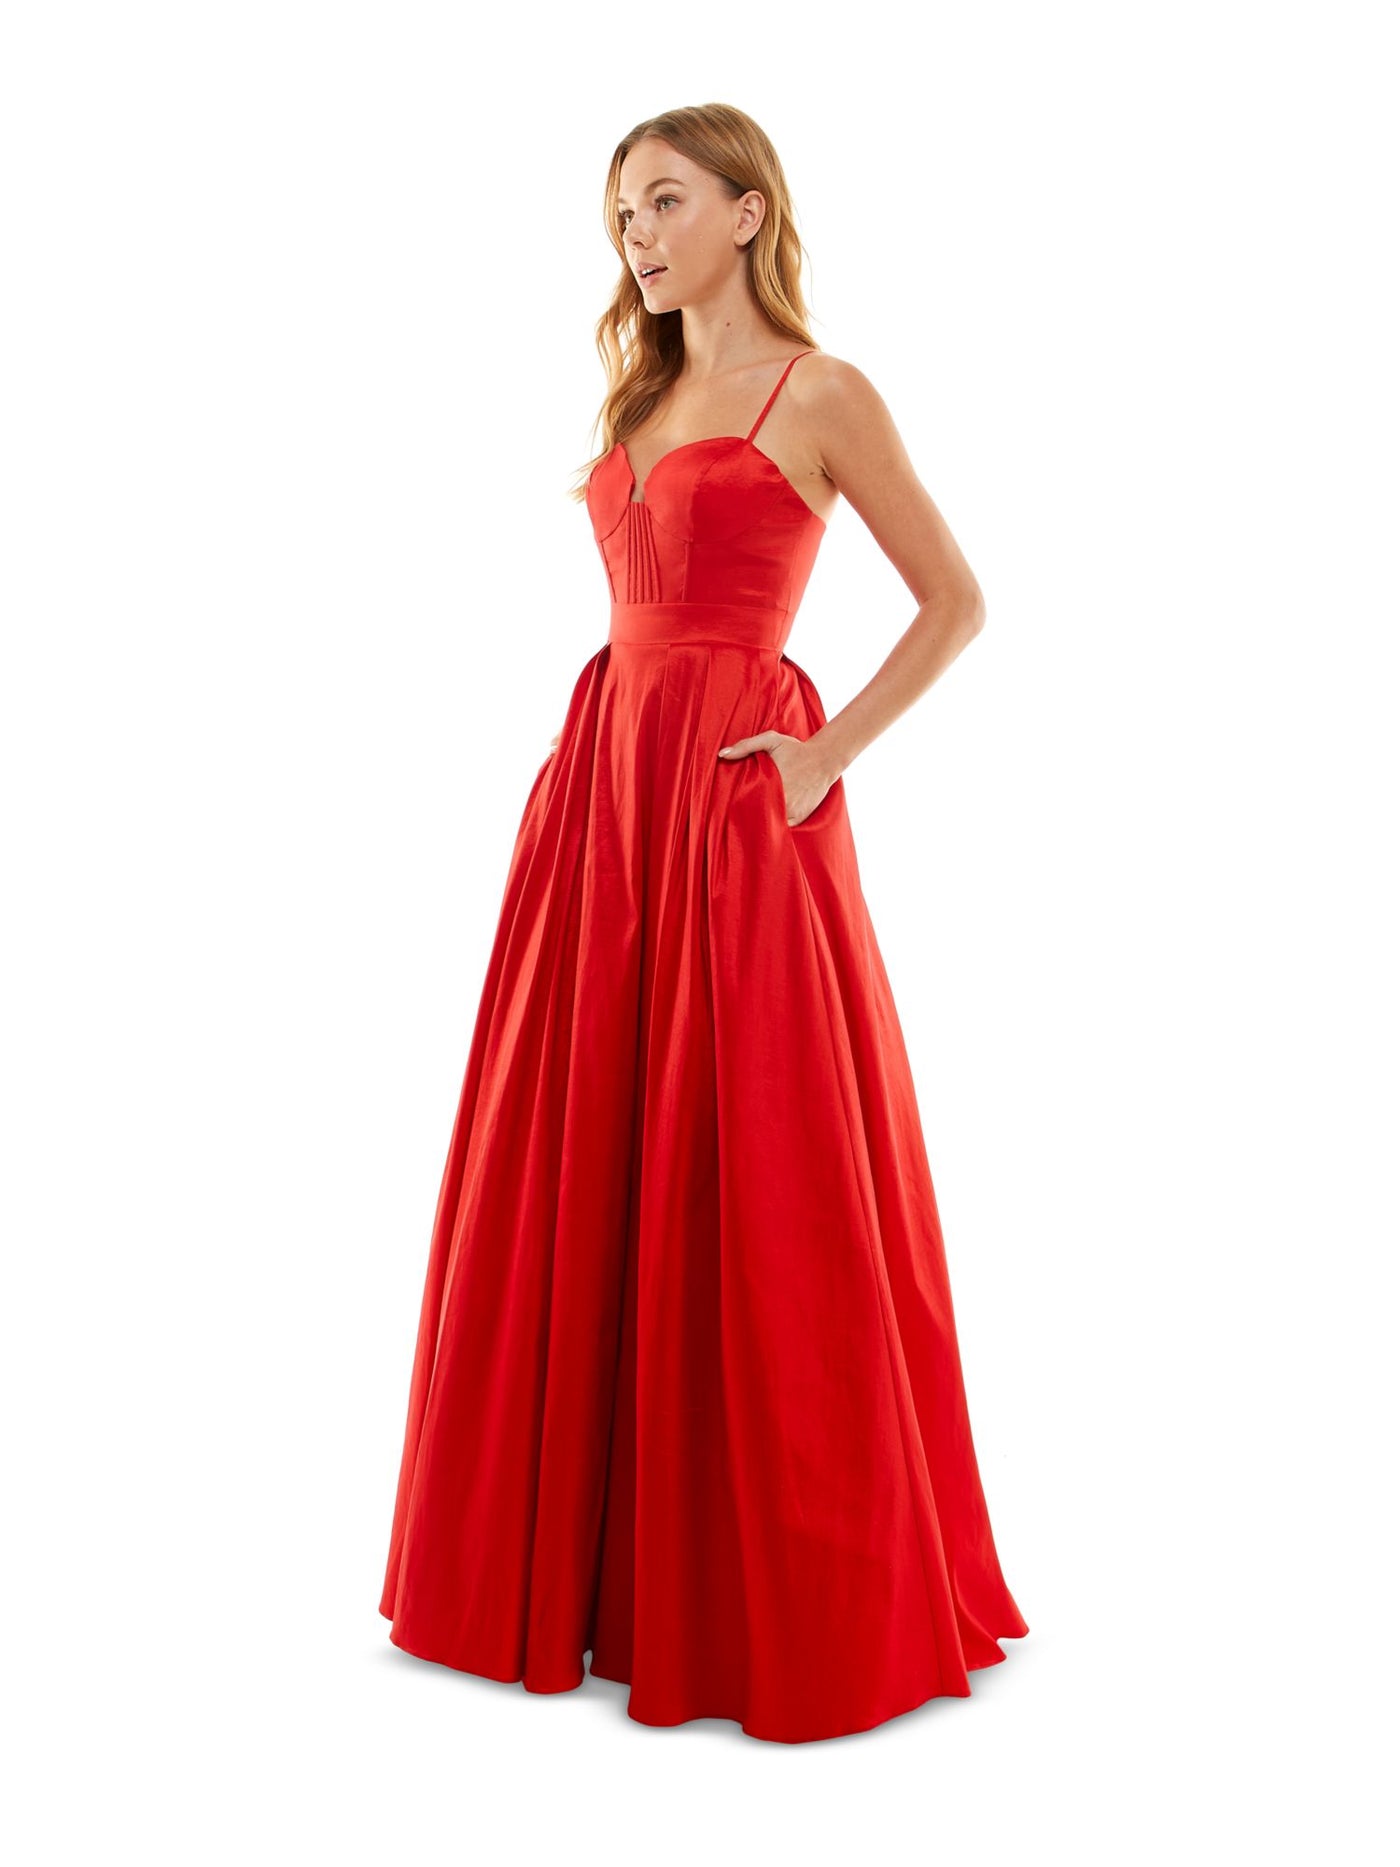 B DARLIN Womens Red Zippered Pleated Boned Corset Pocketed Lined Spaghetti Strap Sweetheart Neckline Full-Length Prom Gown Dress Juniors 7\8